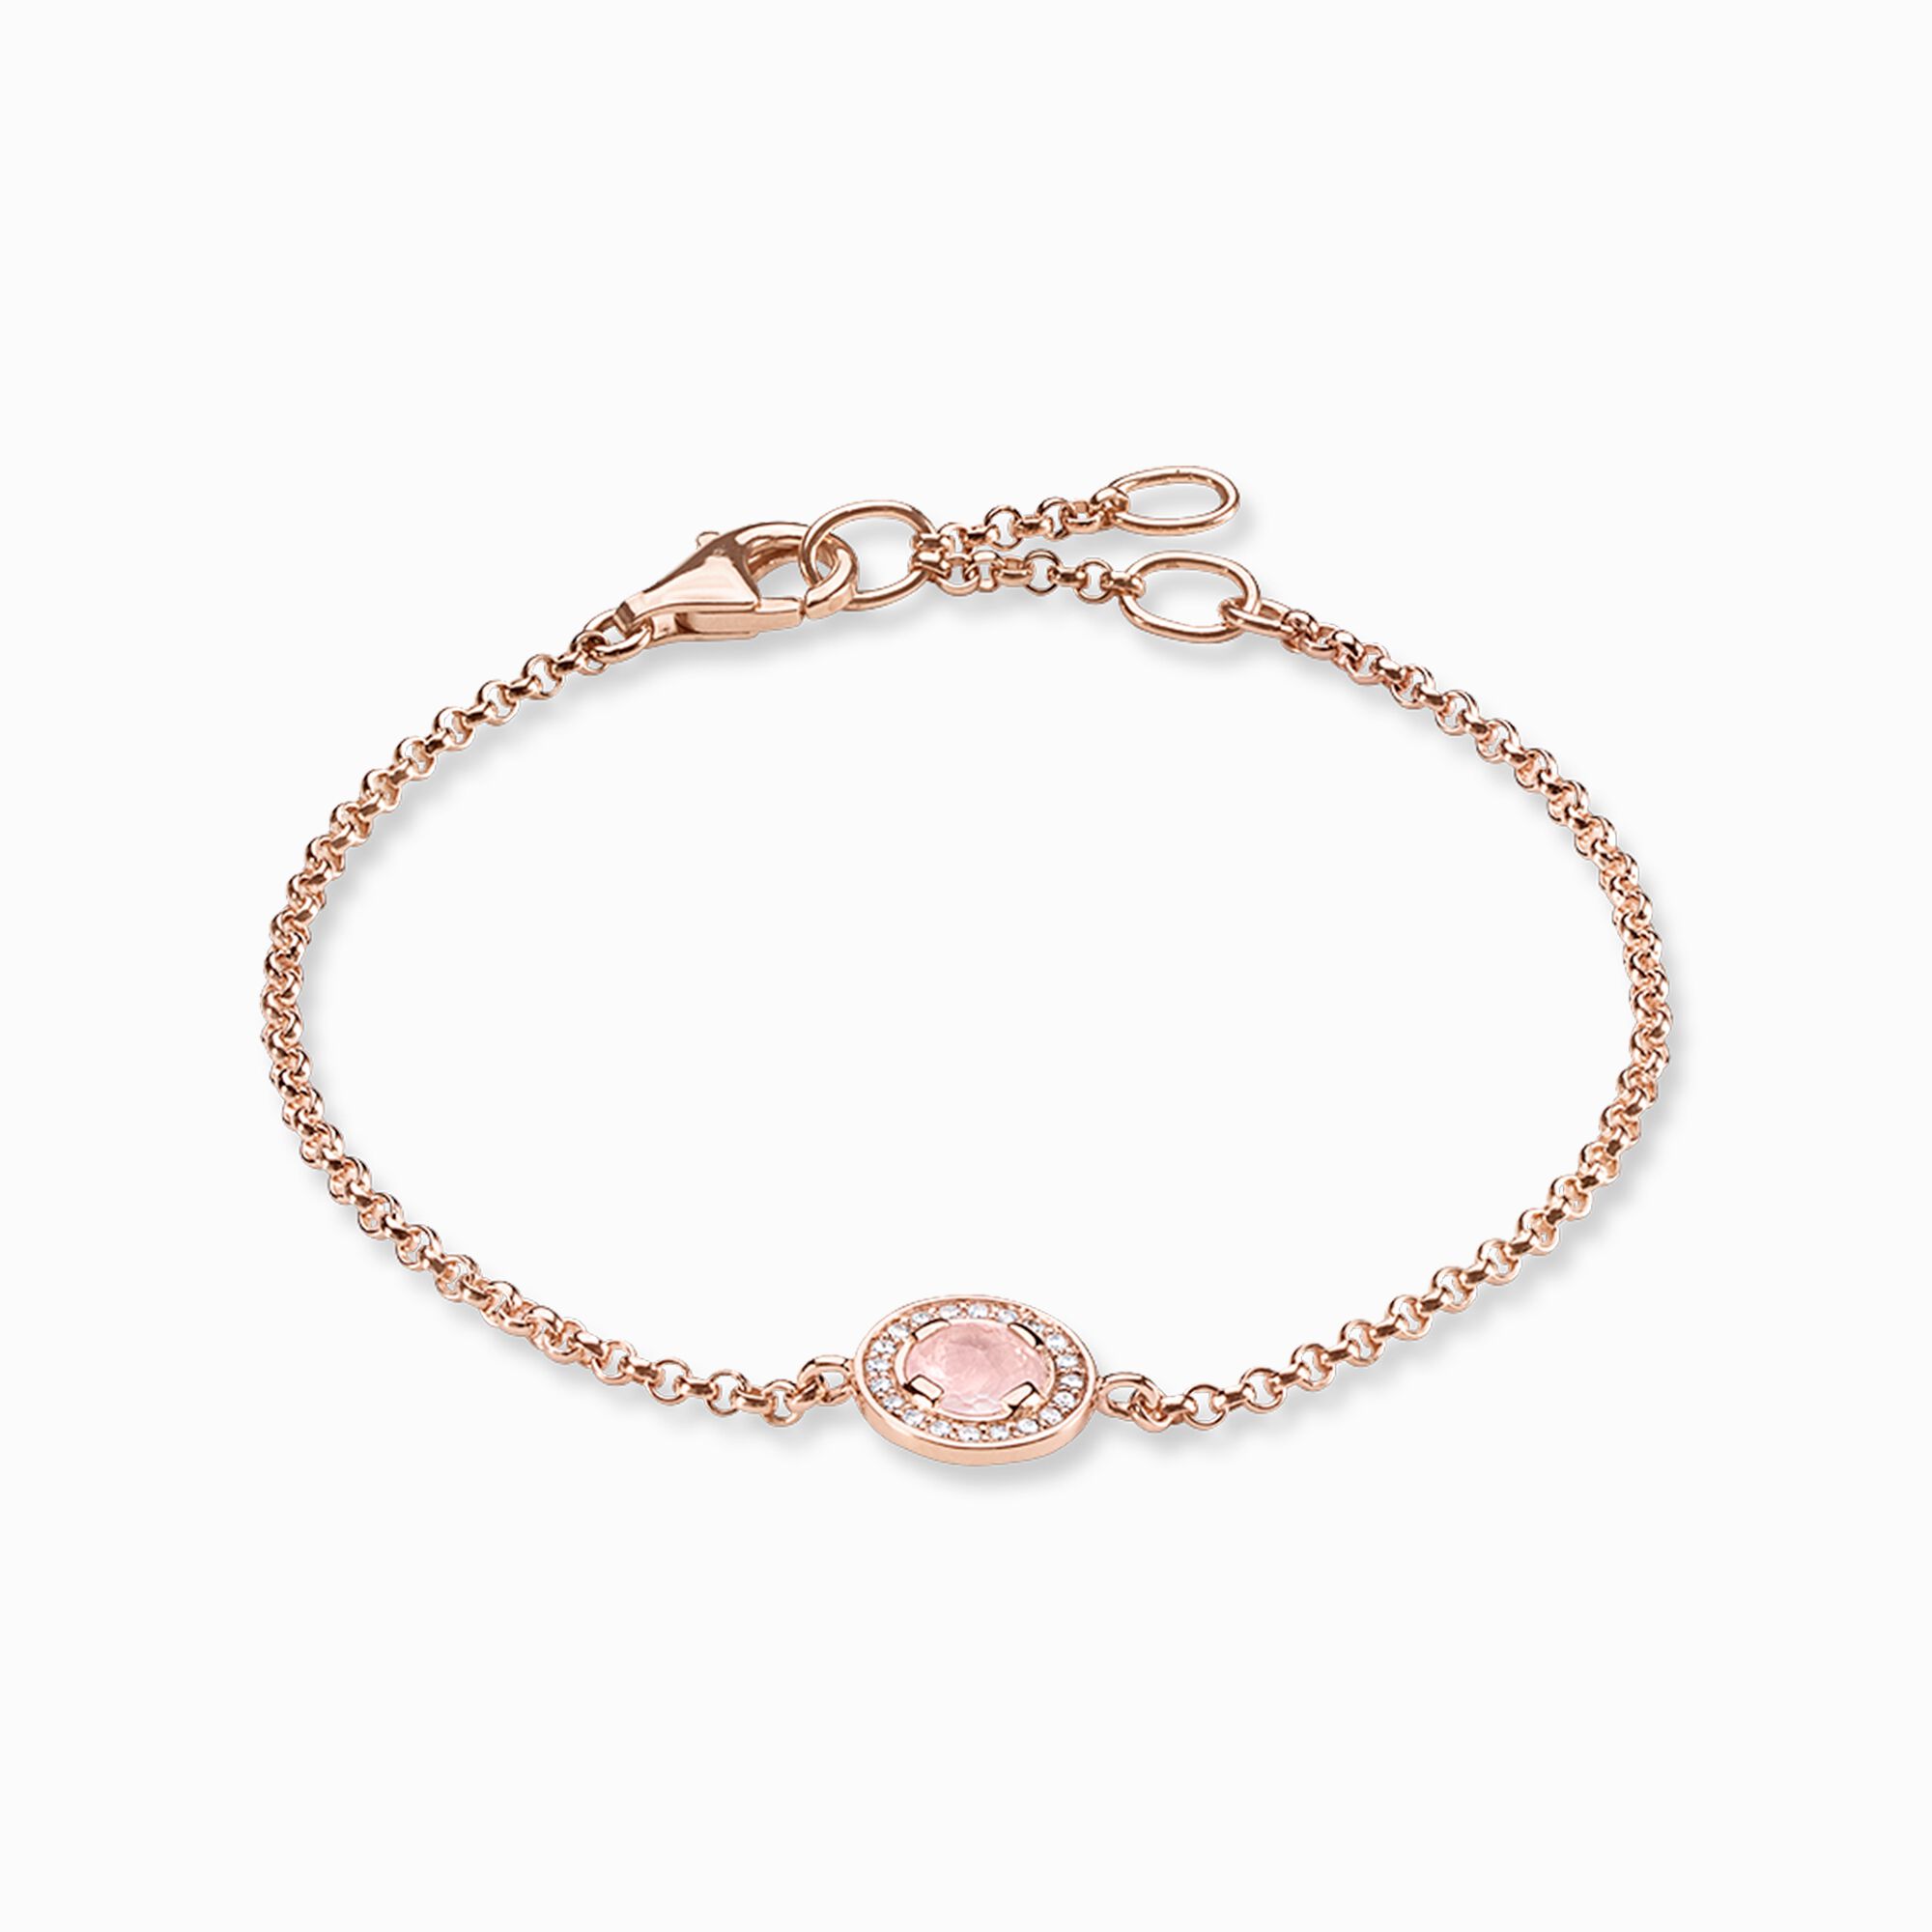 Bracelet light of Luna pink from the Glam &amp; Soul collection in the THOMAS SABO online store